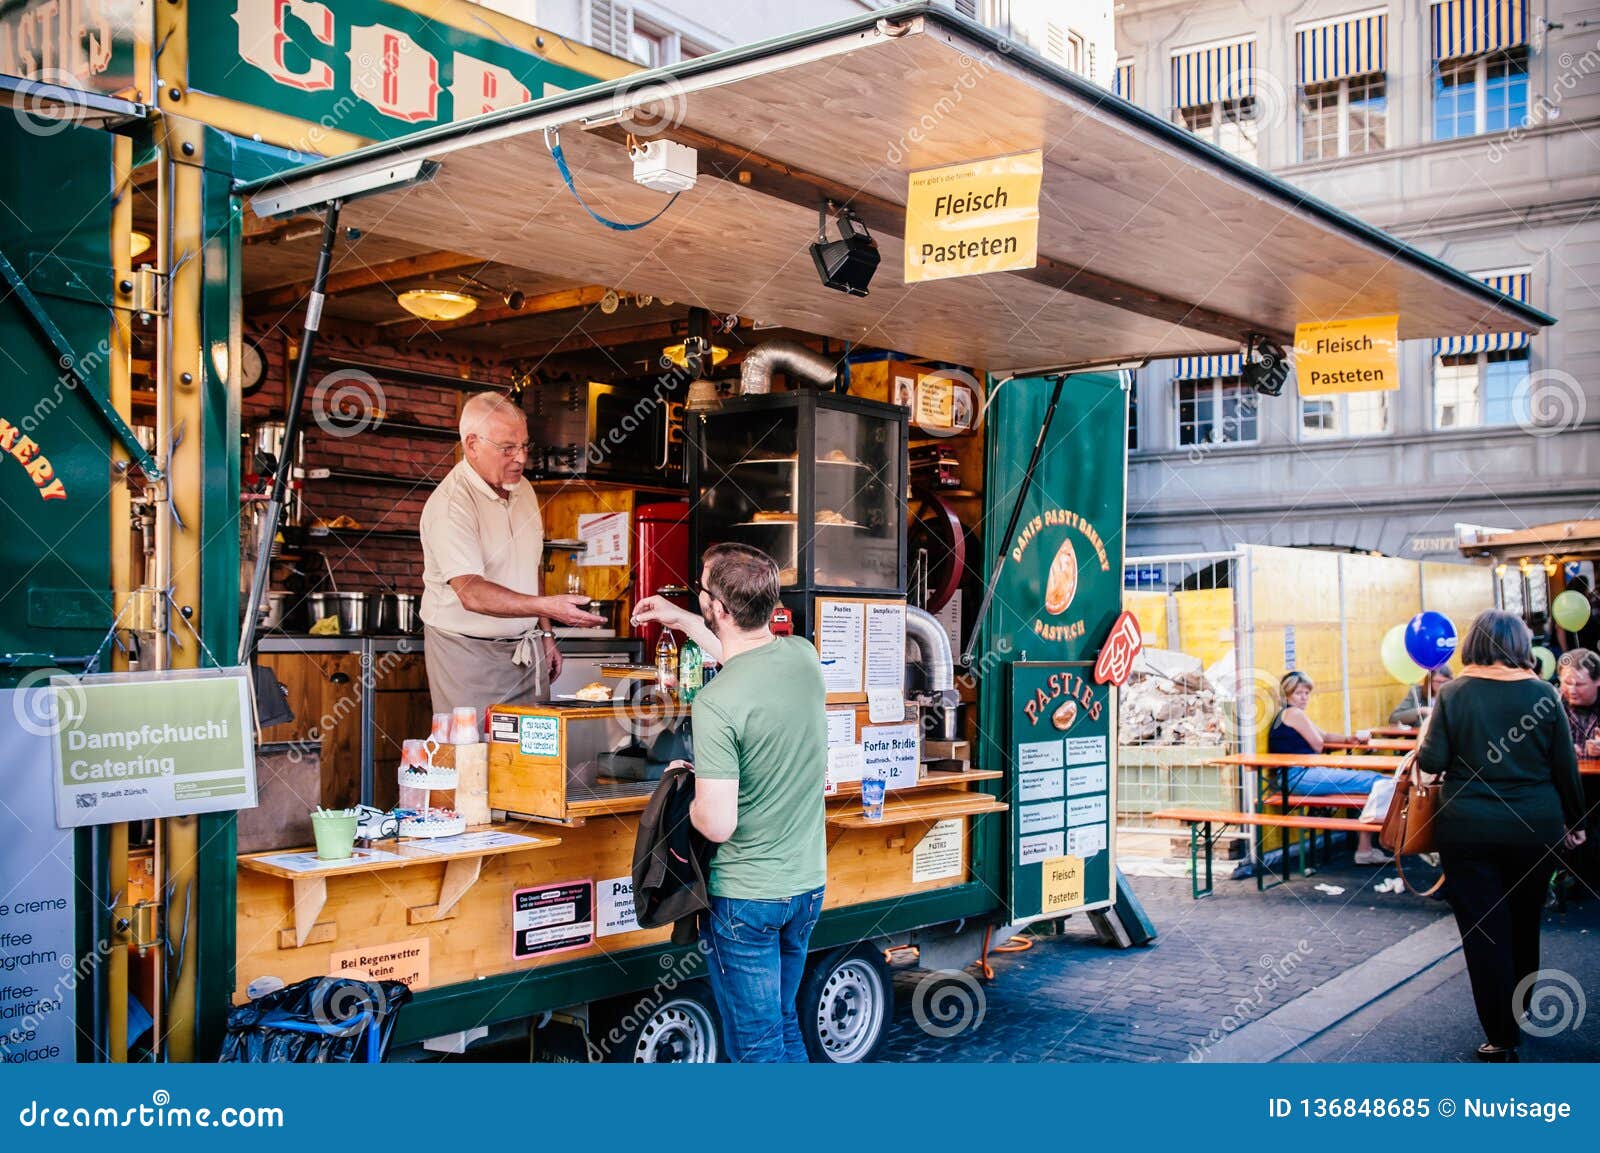 Pastries Bakery and Food Truck in Zurich, Switzerland Editorial Image ...